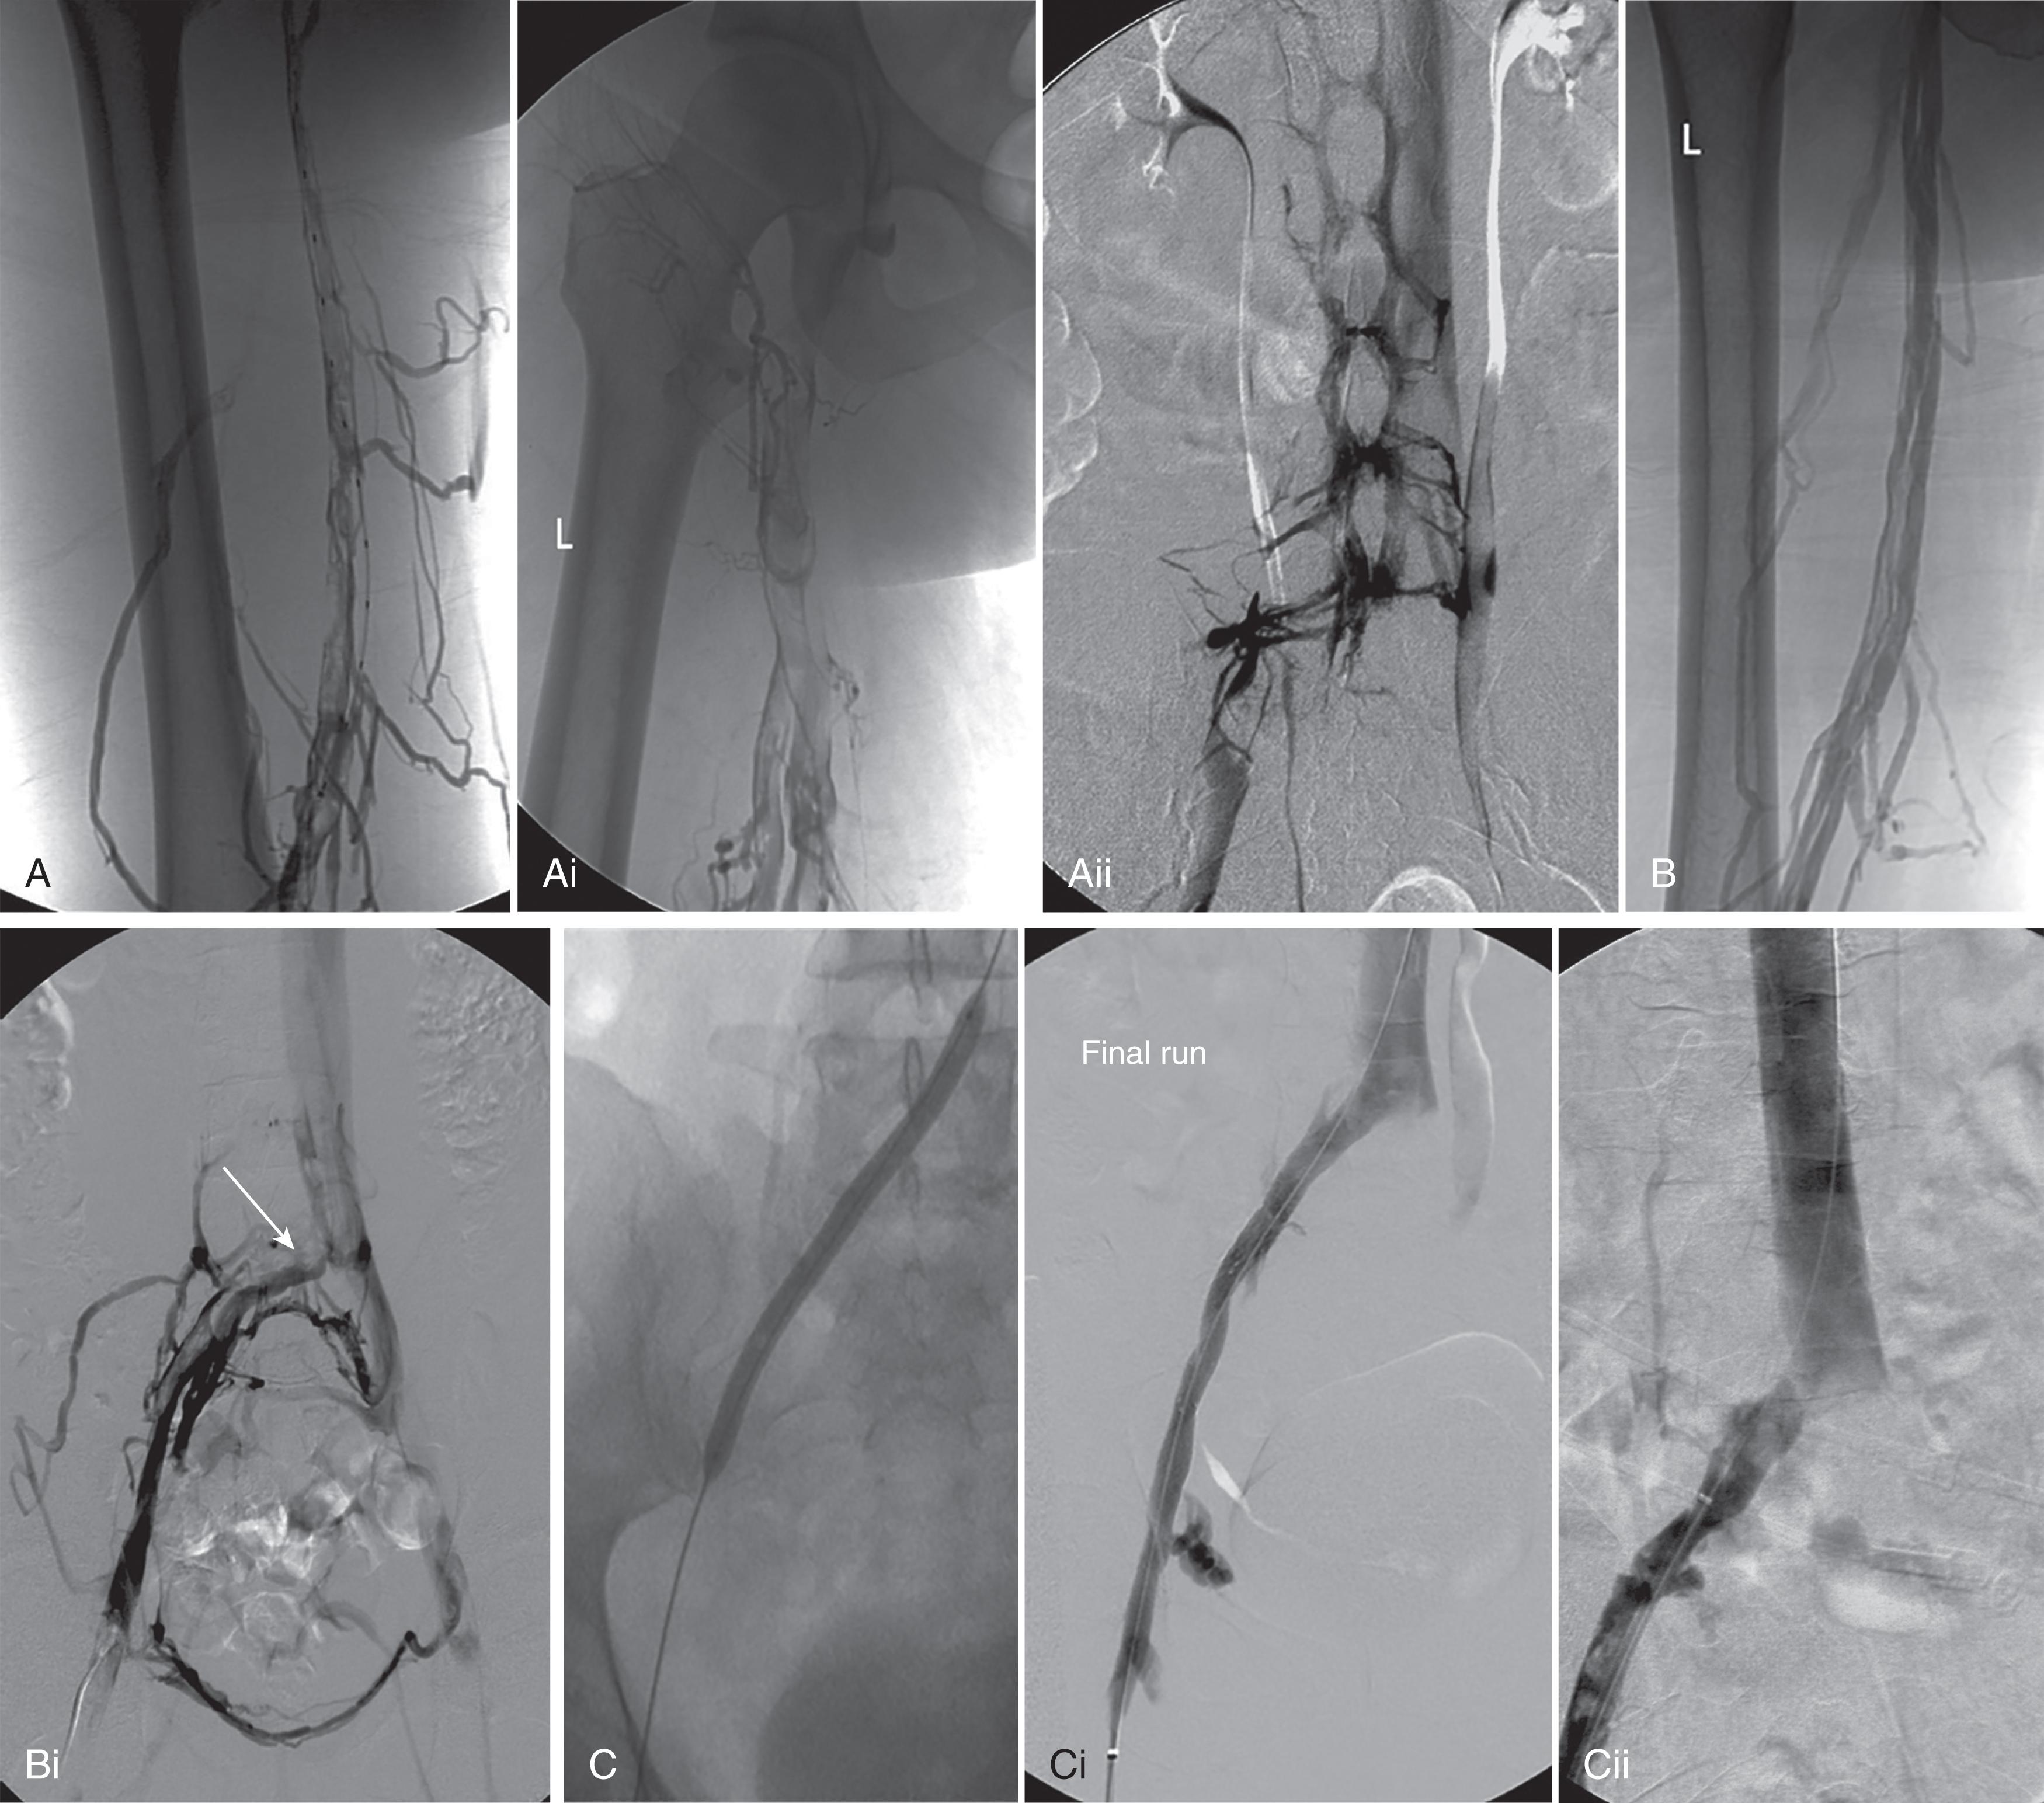 FIGURE 5, Catheter-directed deep venous thrombosis (DVT) treatment in trauma patient found to have iliac vein stenosis (May-Thurner syndrome). Young athletic woman with sports-related high-grade splenic laceration after splenectomy. One week postoperatively, during rehabilitation, she developed left lower extremity DVT with marked swelling and pain. Doppler with waveform analysis showed extensive DVT in the popliteal, femoral, and iliac system. The clinical team elected catheter-directed thrombolysis in order to reduce DVT volume due to age and mitigate the development of postthrombotic syndrome. (A–Aiii) Initial venograms of left lower extremity via left popliteal venous access showed DVT from popliteal vein to iliac vein and occluded iliac vein at the inferior vena cava junction with number paravertebral collaterals. The procedure was performed with the patient in a prone position. Tissue plasminogen activator was infused for 24 hours. (B, Bi) Follow-up venogram showed clearing of DVT in femoral-iliac system and stenosis at the common iliac vein-inferior vena cava junction, at crossover of right iliac artery and left common iliac vein, described as May-Thurner Syndrome (arrow) . (C–Cii) Balloon angioplasty was performed at the iliocaval junction with improved pelvic inflow. She was started on oral anticoagulation, and her lower extremity symptoms resolved.